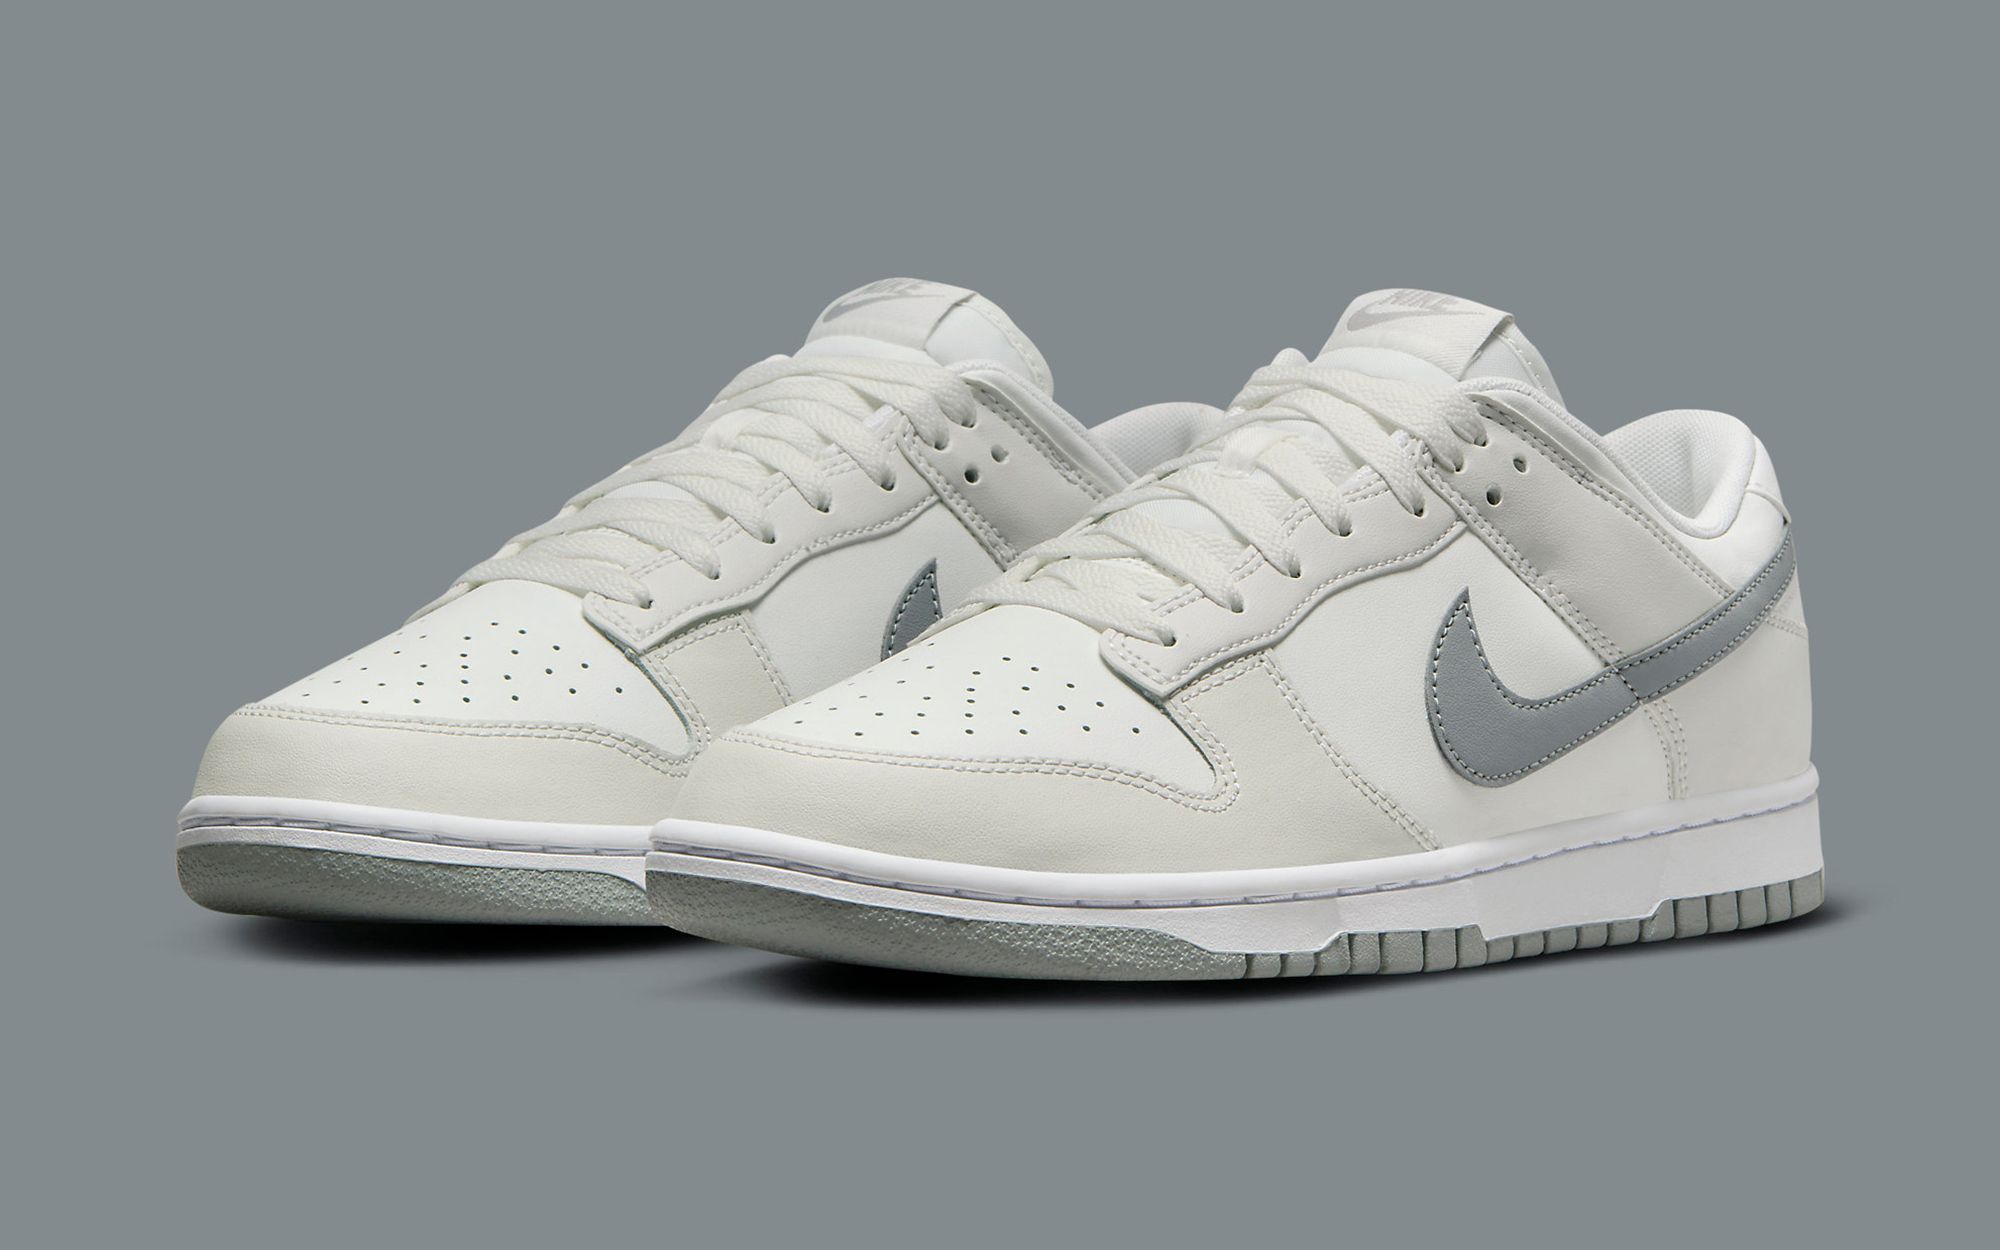 The Nike Dunk Low Surfaces in Summit White and Smoke Grey | House